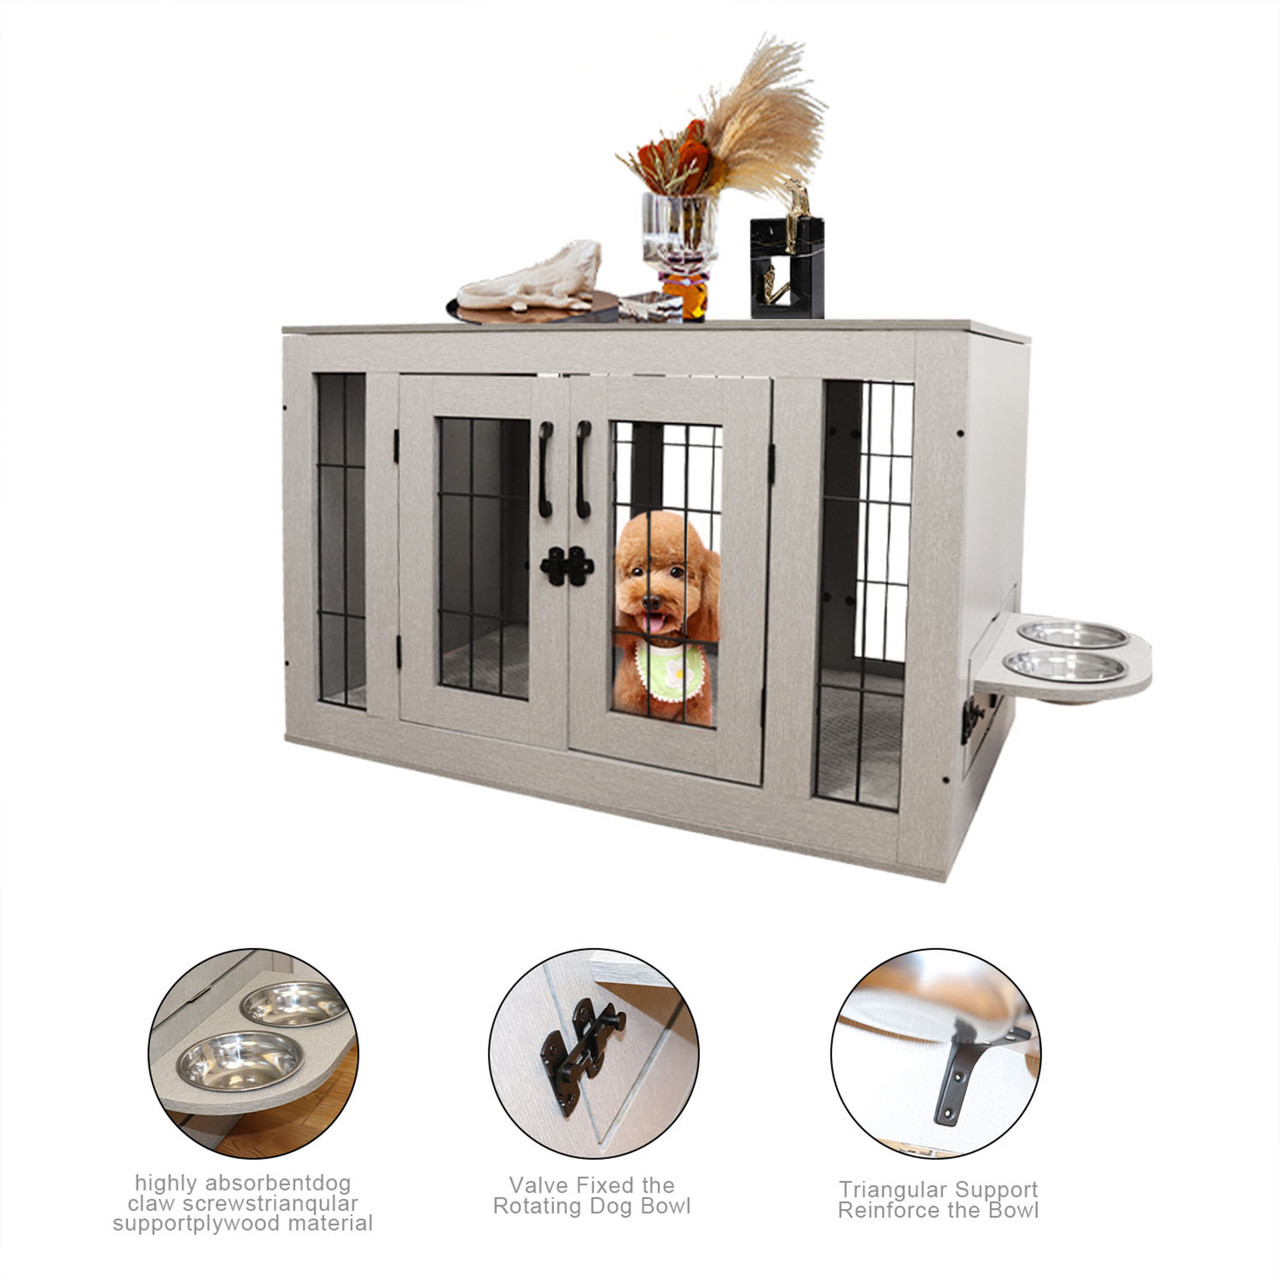 Small Soft Crate – Arf Pets